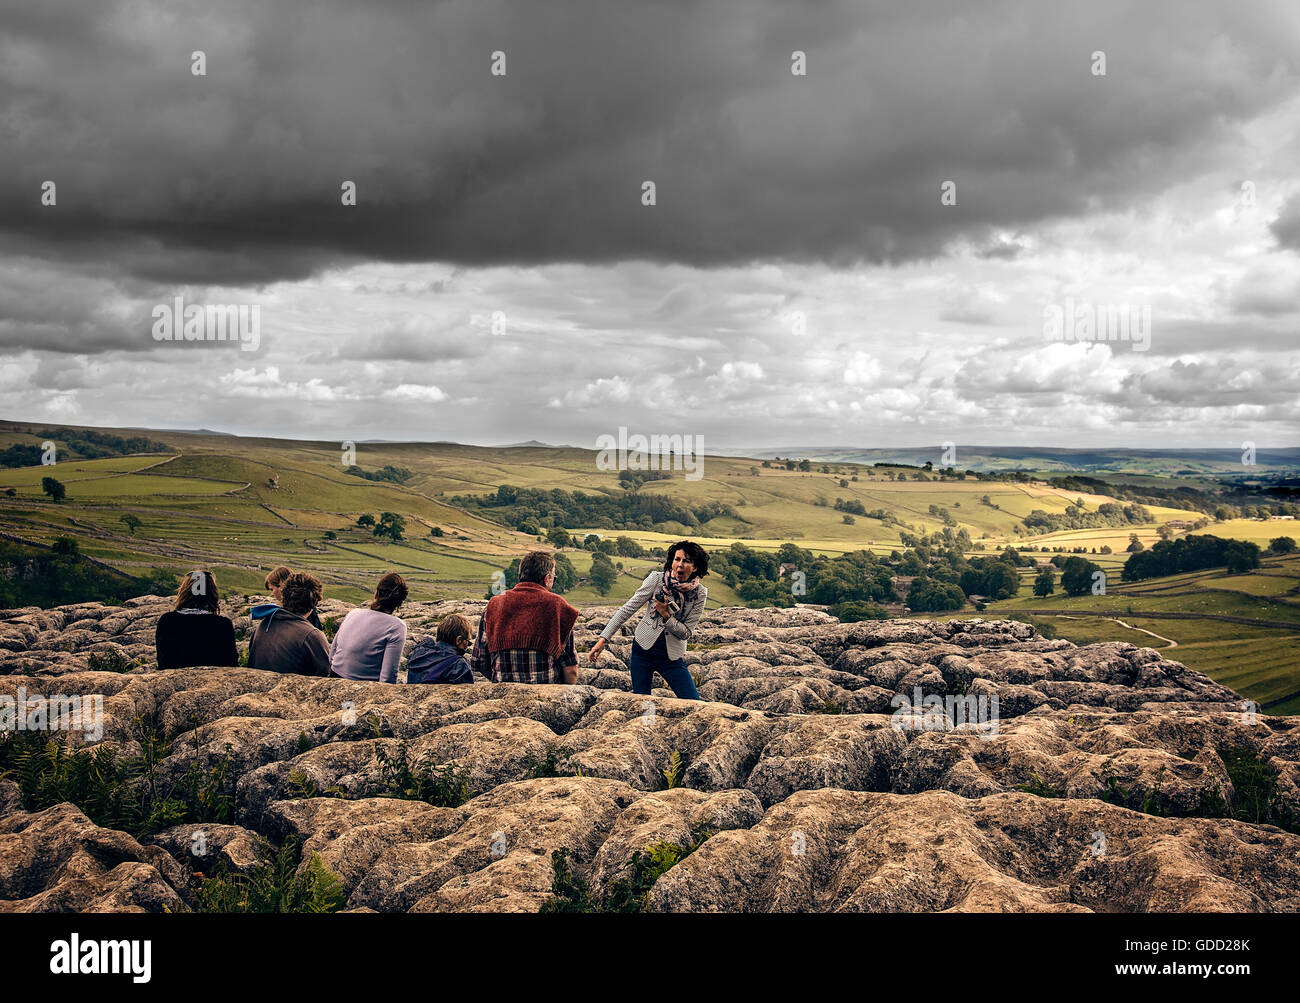 Group of people on Malham Cove enjoying the view as the rain begins.  Family sitting on rocks outdoors for rainy picnic with dark skies on the horizon Stock Photo